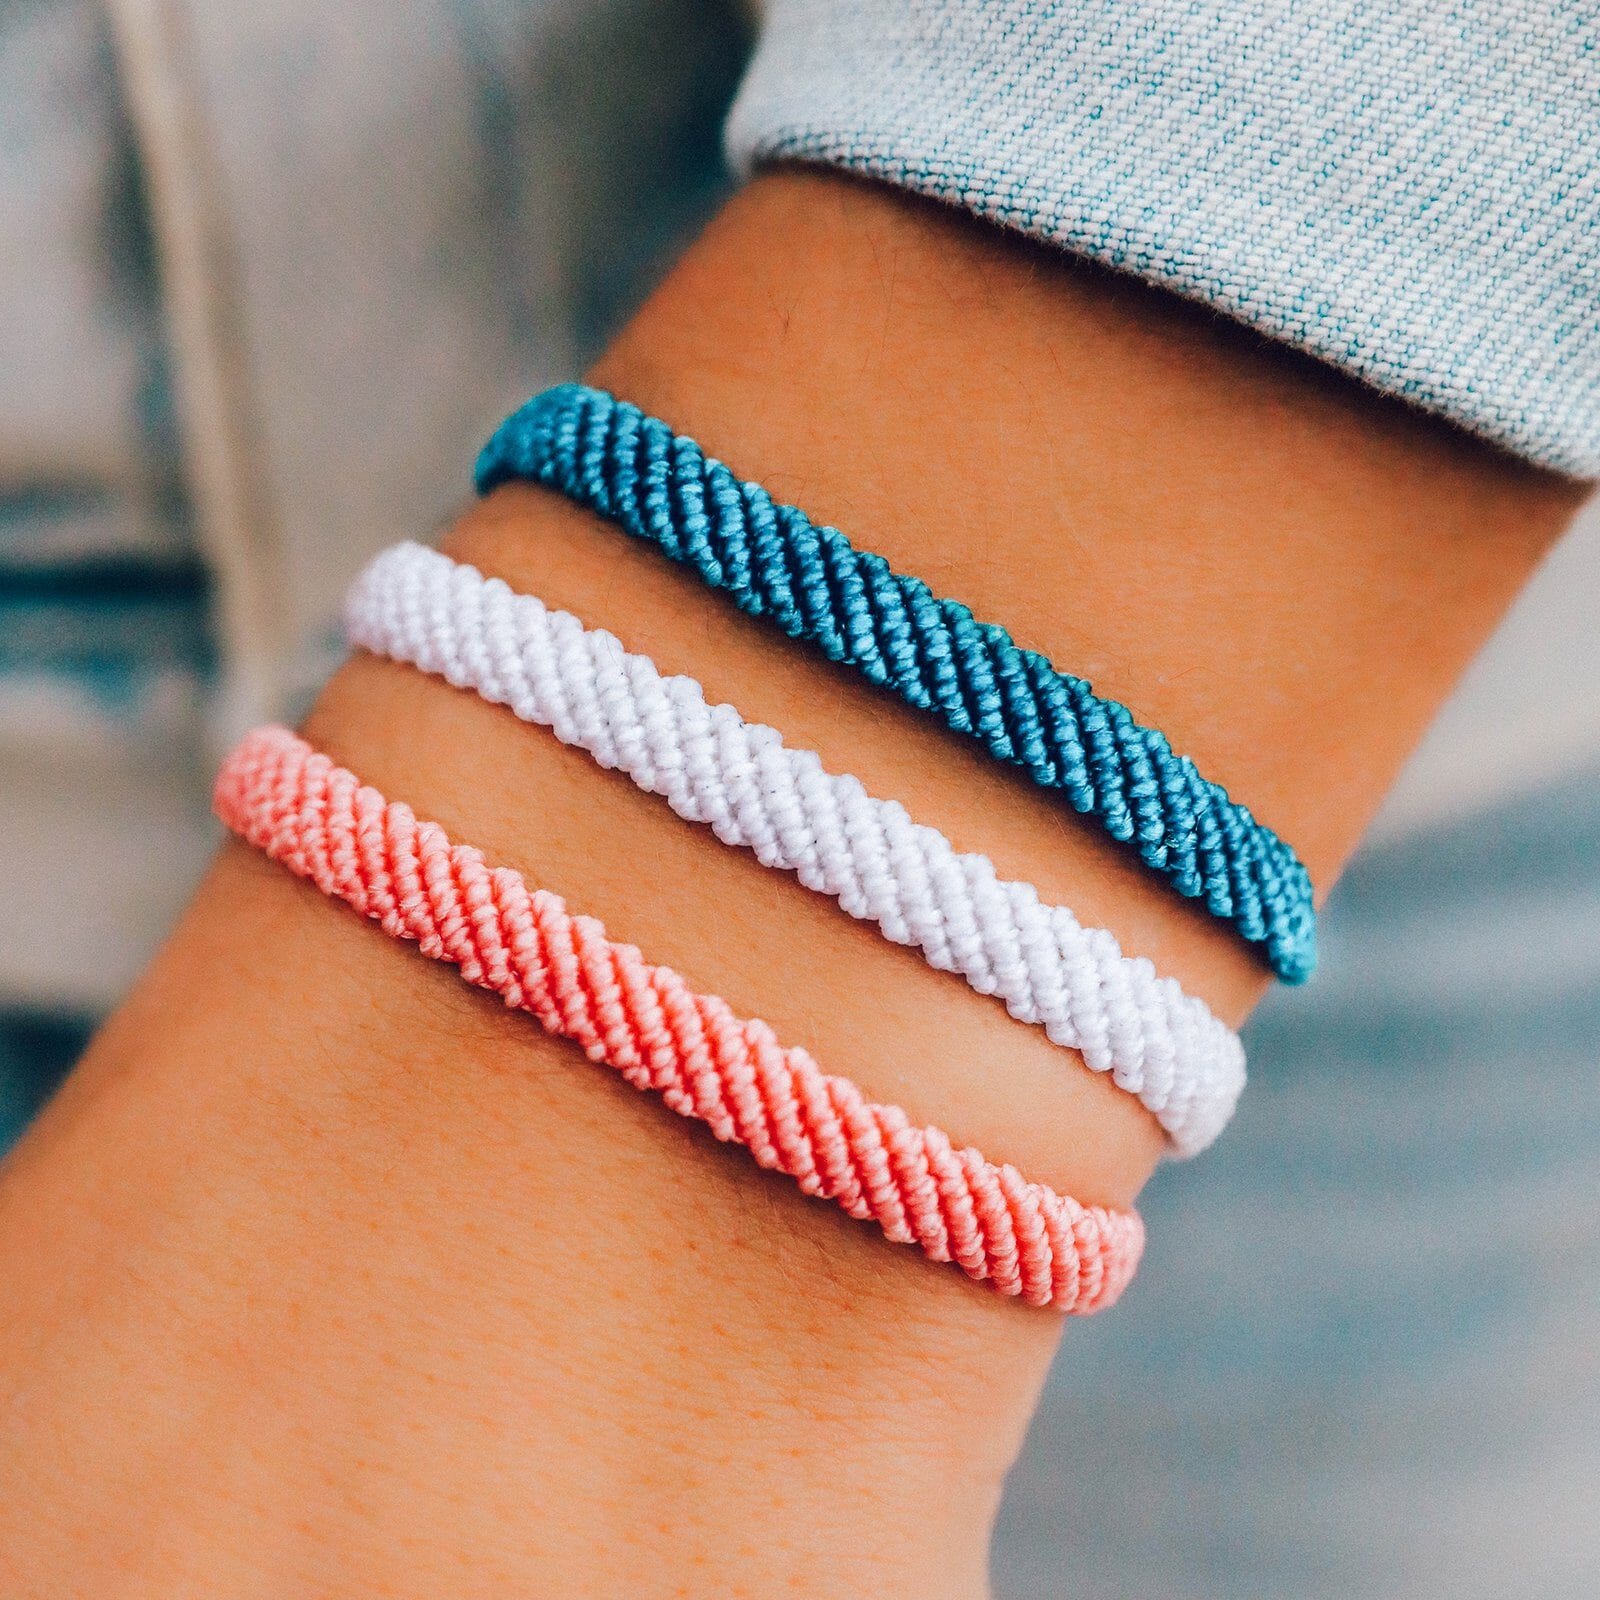 obmwang 16 Pieces Nepal Woven Friendship Bracelets Adjustable Braided  Bracelets with a Sliding Knot Closure for Kids, Girls, Women and Men :  Amazon.in: Toys & Games